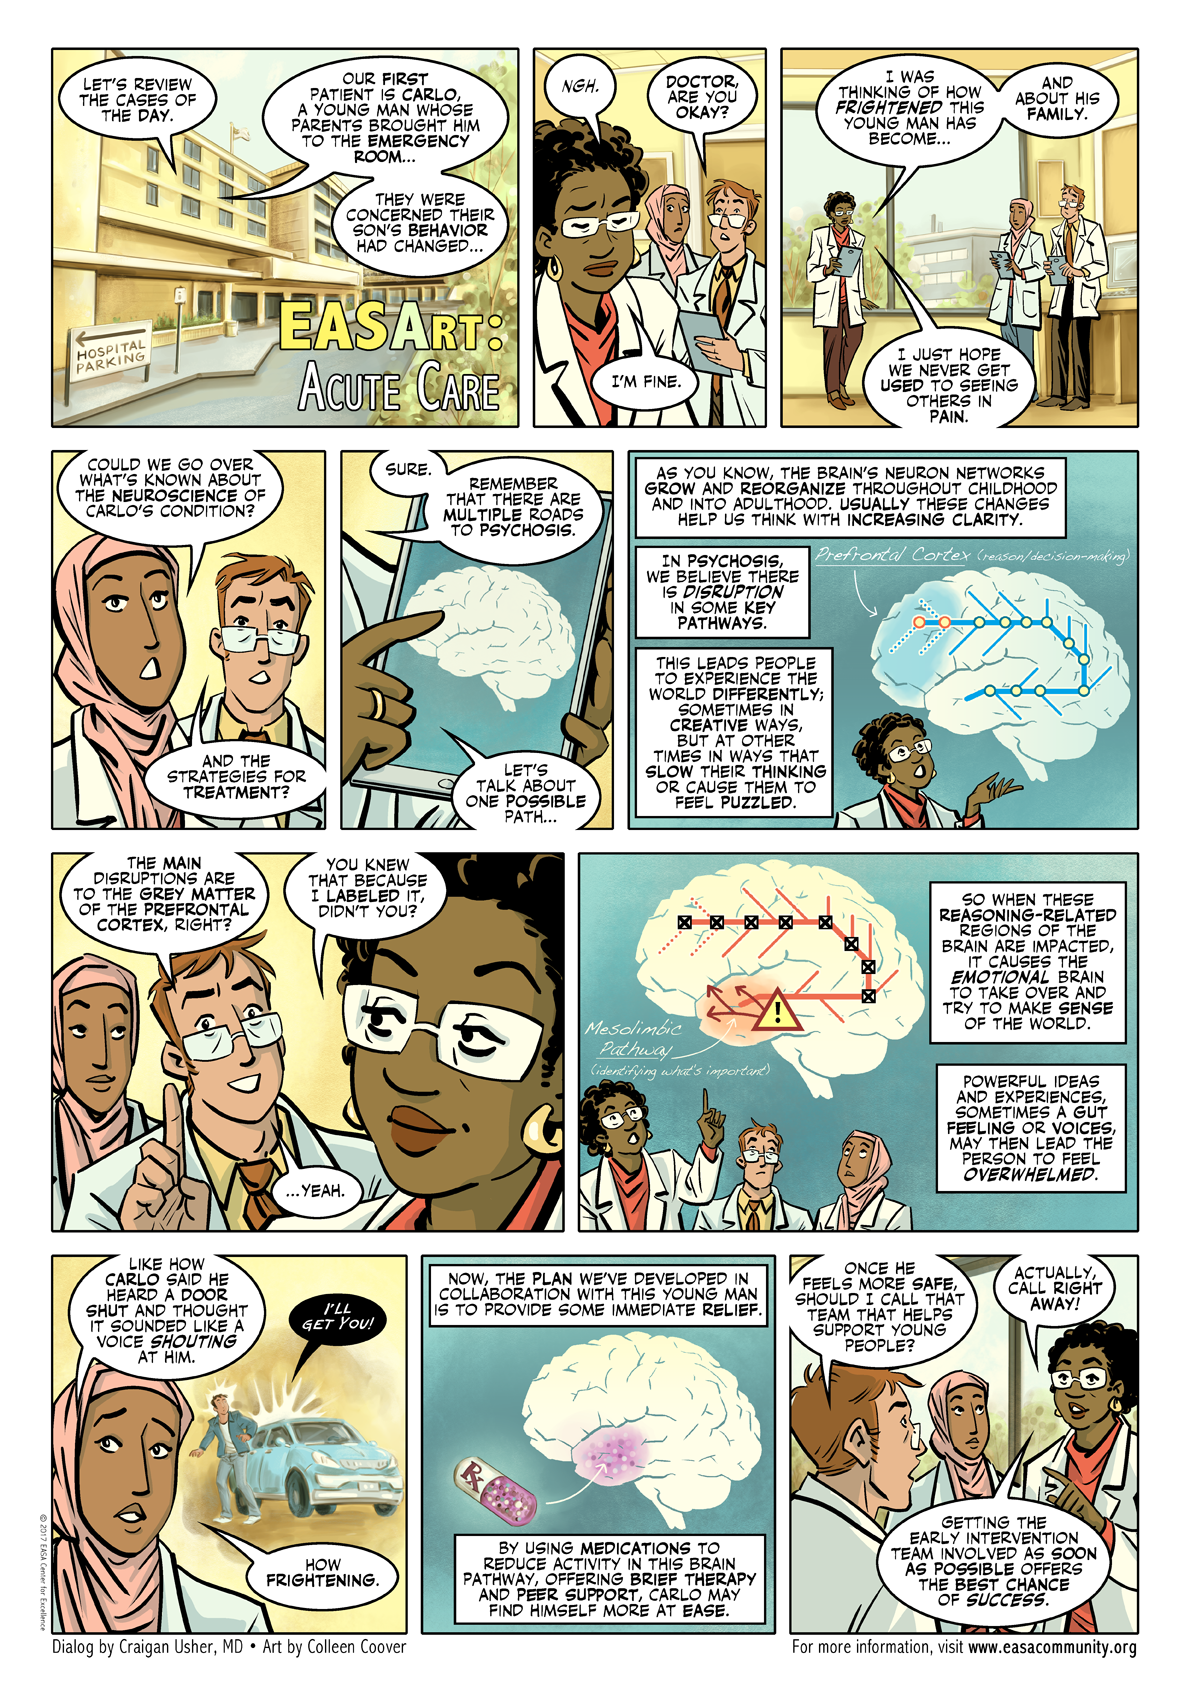 From EASArt, a collection of comics on coordinated specialty care